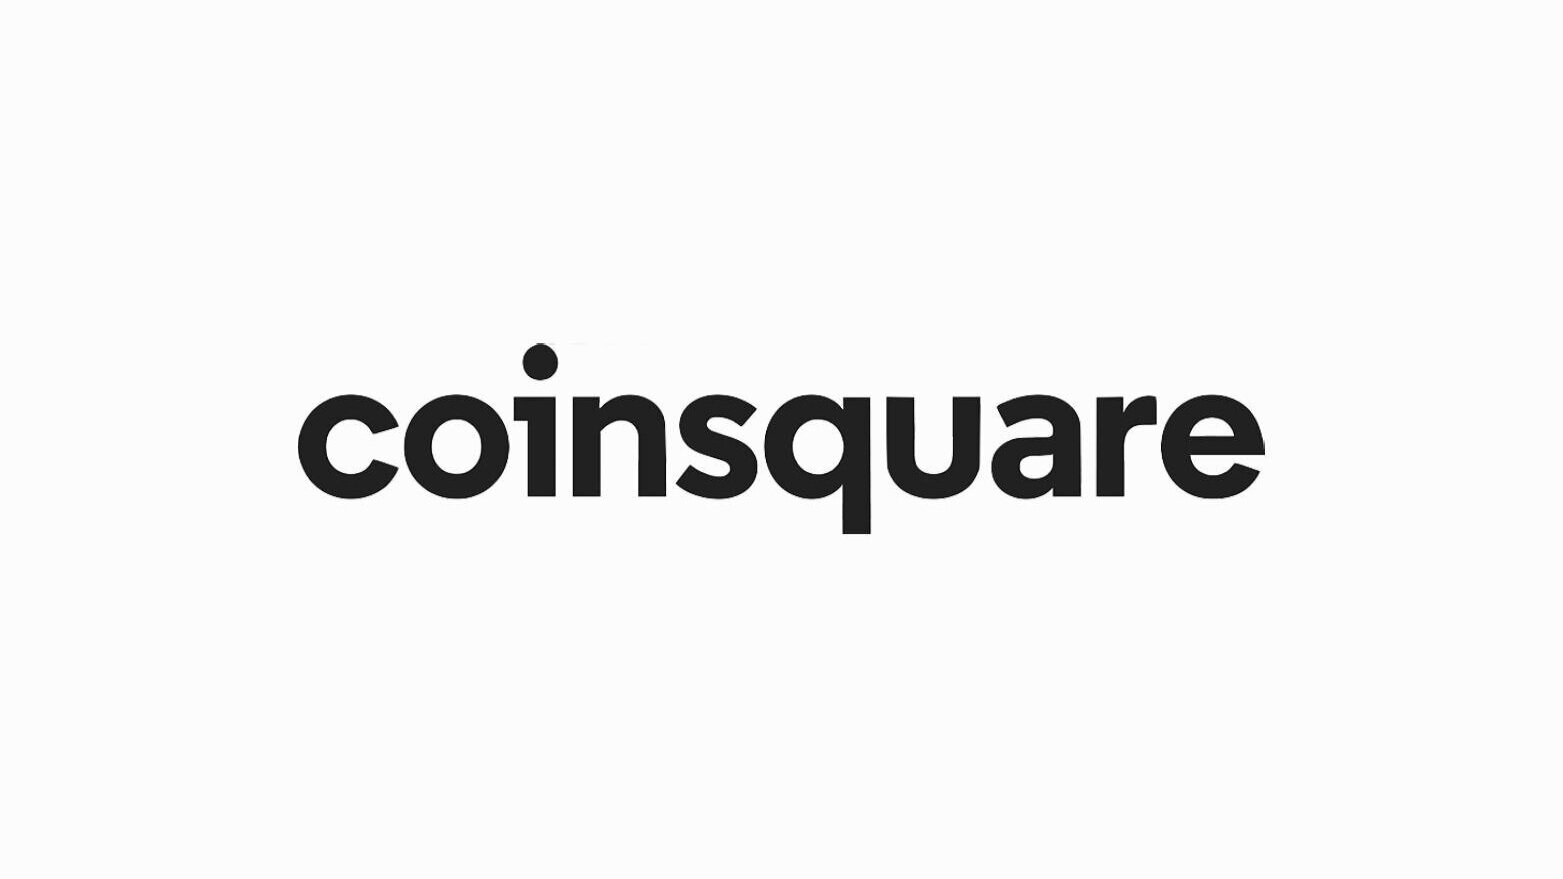 coinsquare+thelosttwo+influencer.jpg